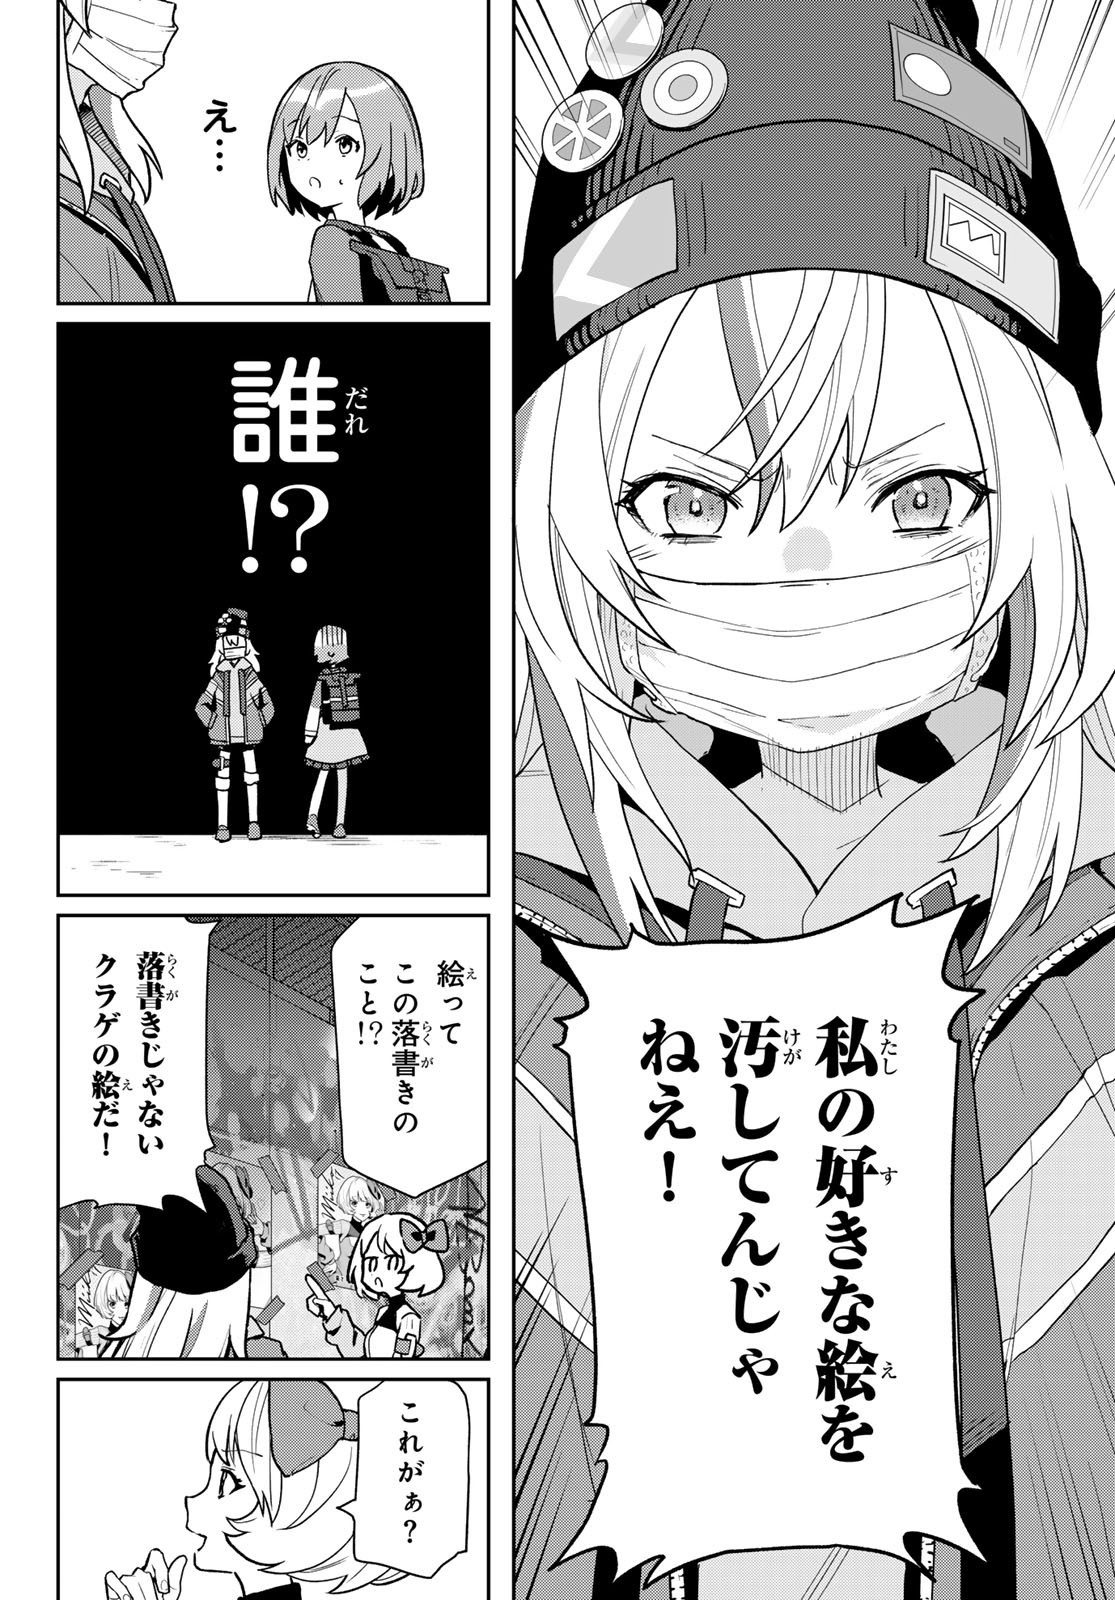 Weekly Shōnen Magazine - 週刊少年マガジン - Chapter 2024-24 - Page 511